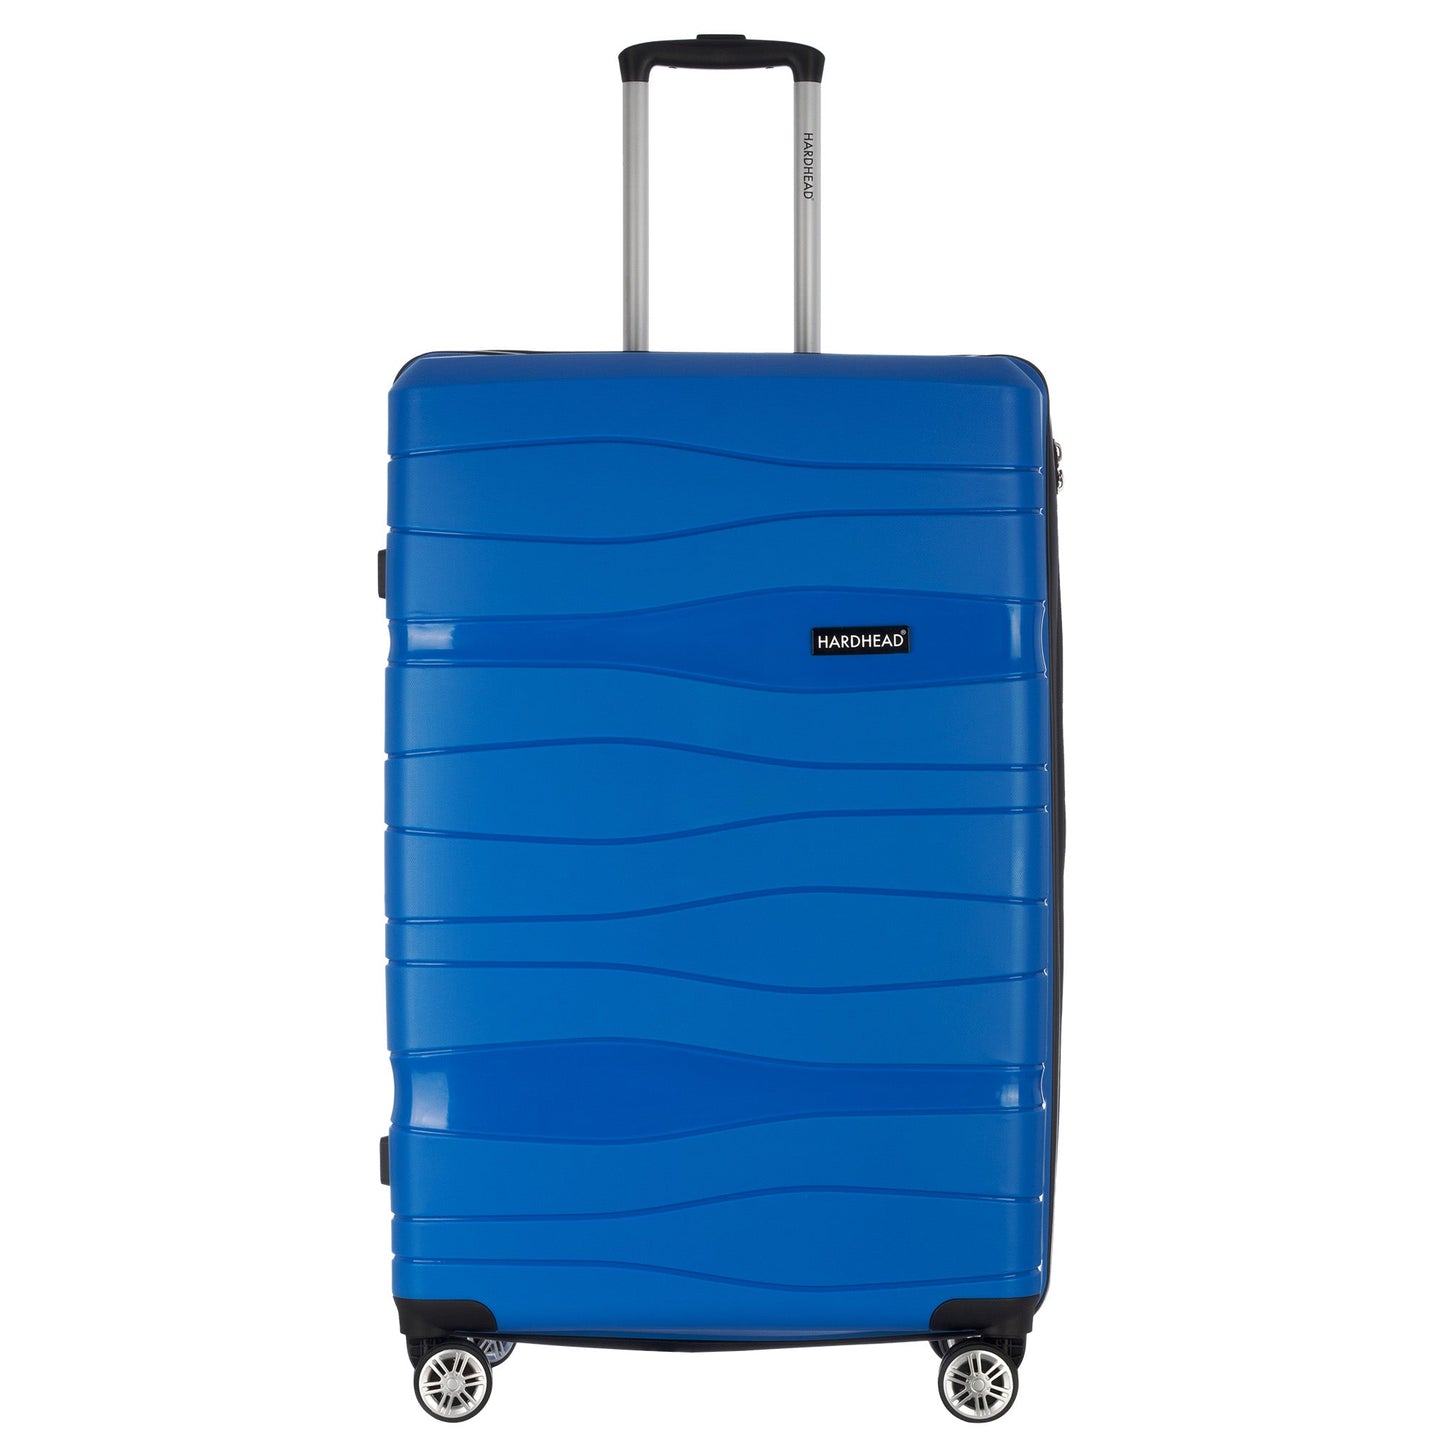 Polyprop Collection Blue Luggage (21/25/29") Suitcase Lock Spinner Hardshell